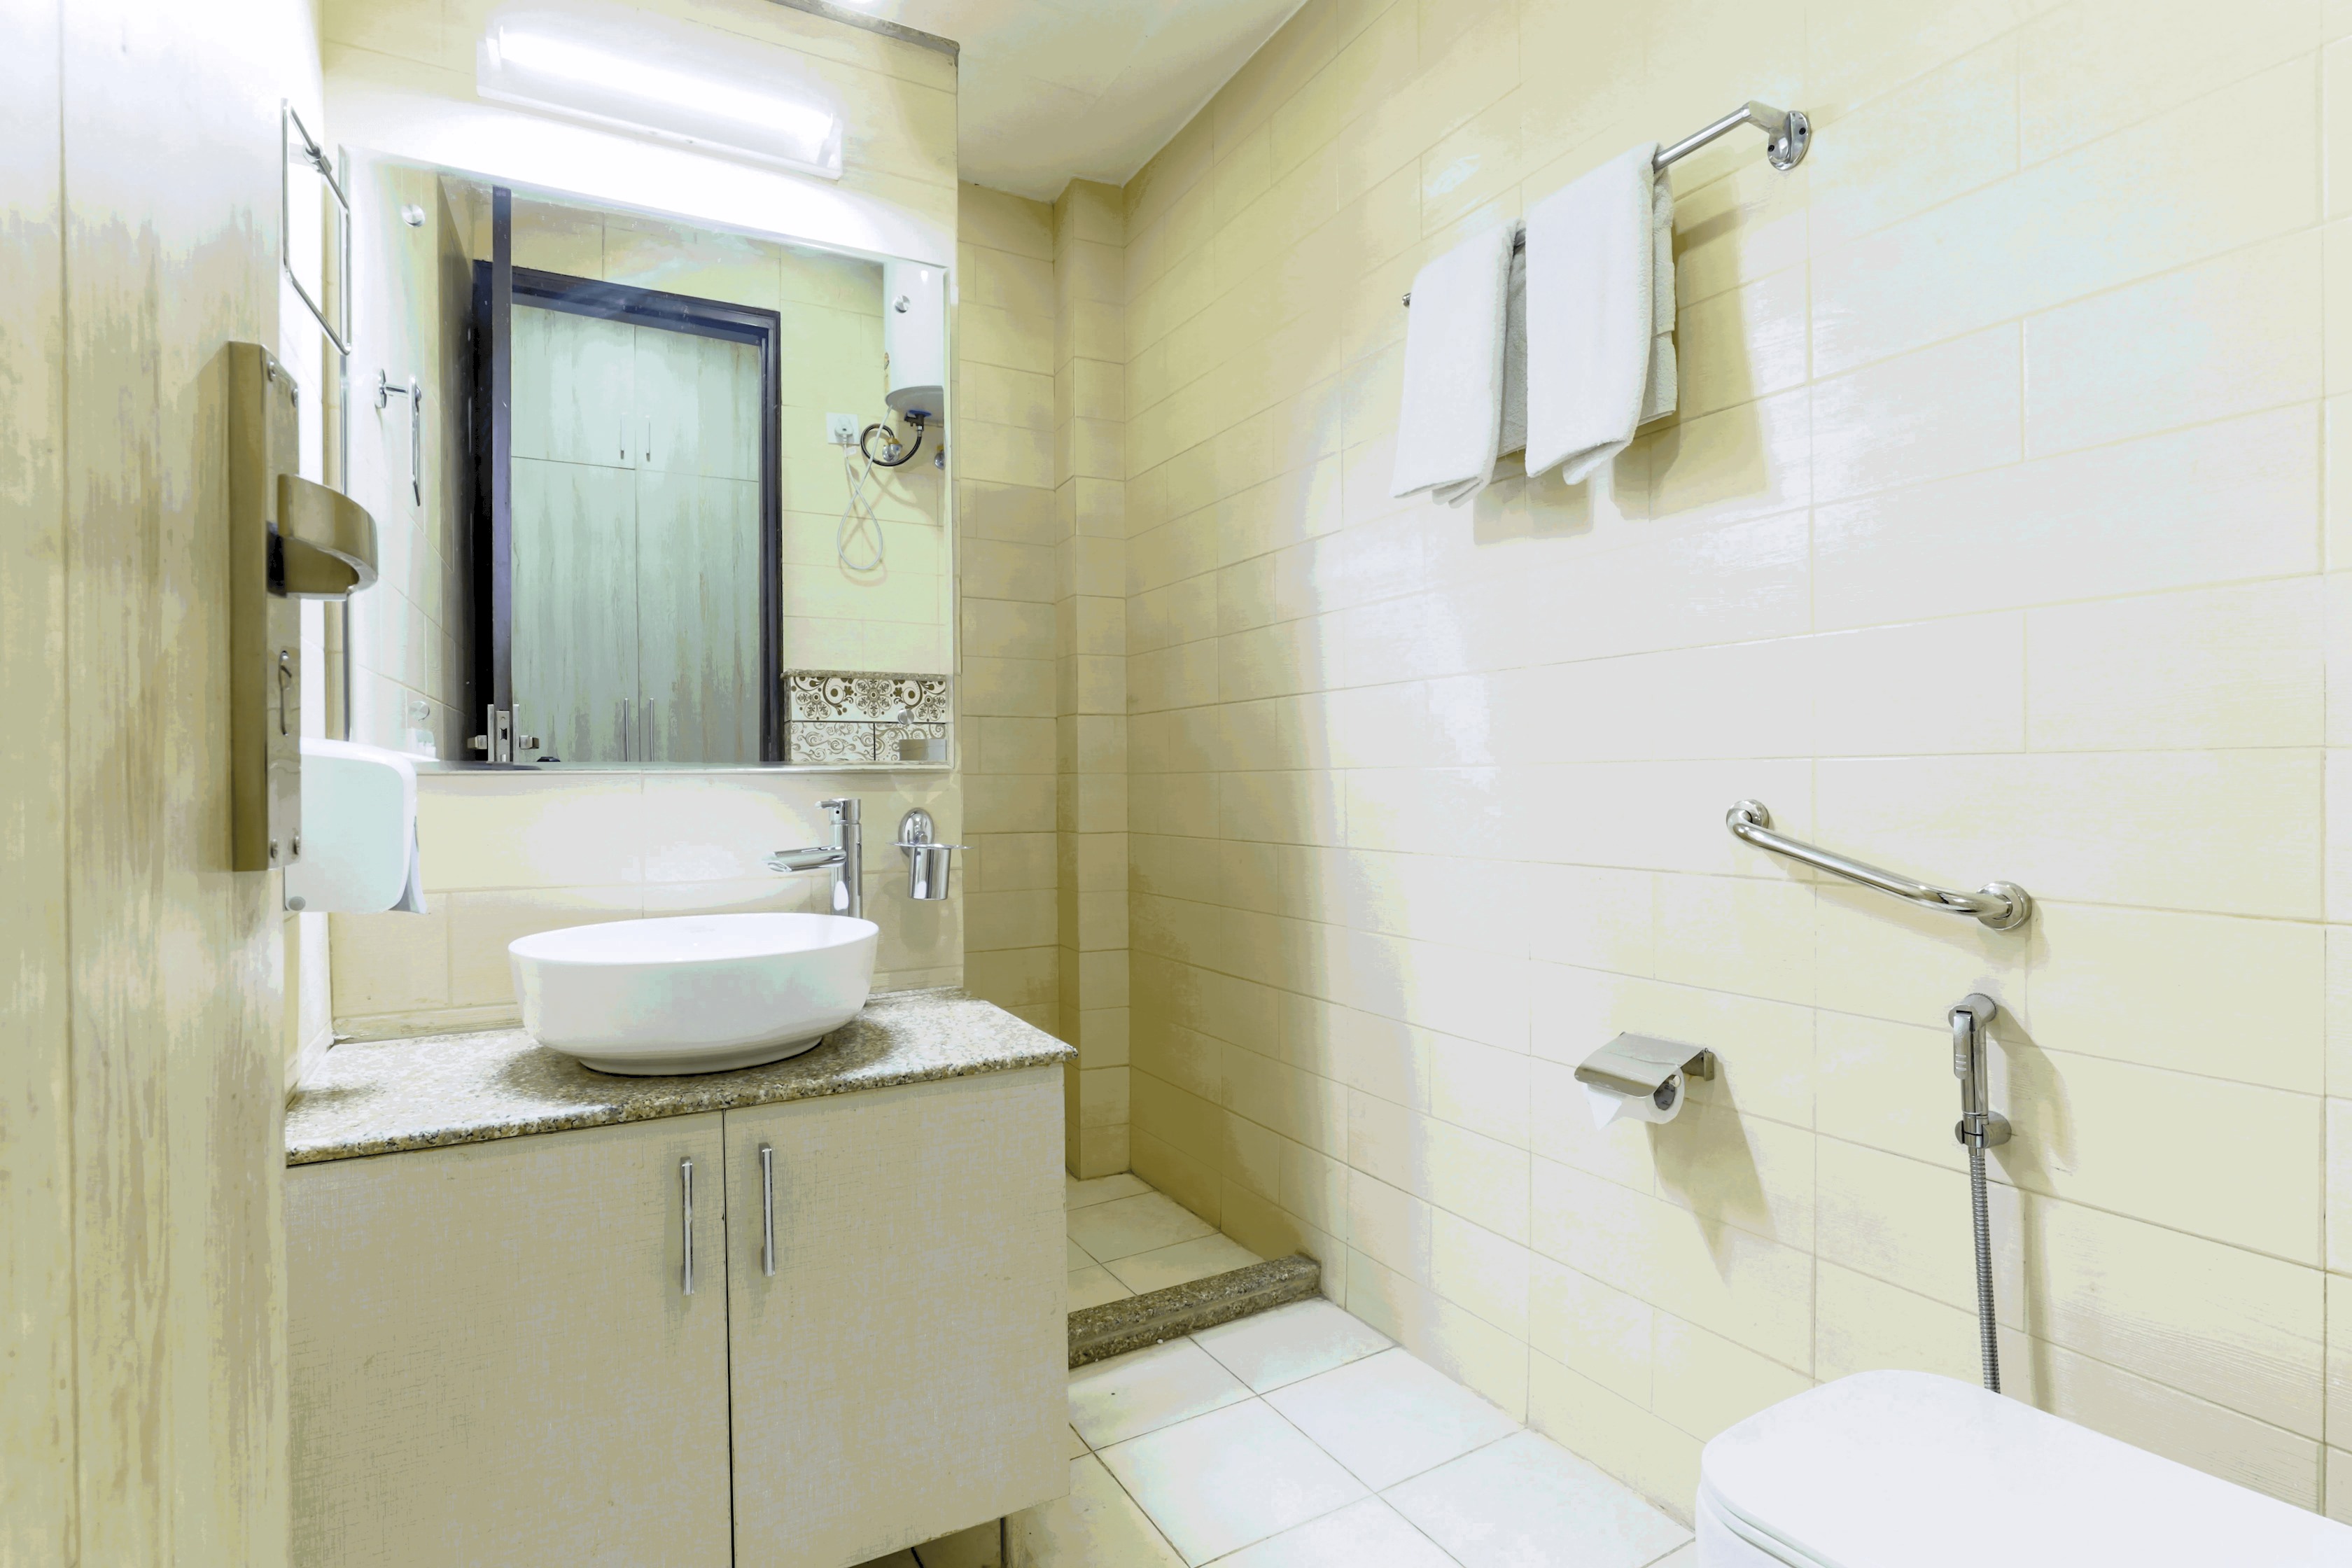 Parfait Street Convenience: Enjoy the comfort and privacy of a modern, attached bathroom with all the essential fixtures including a shower, sink, and toilet for your convenience
